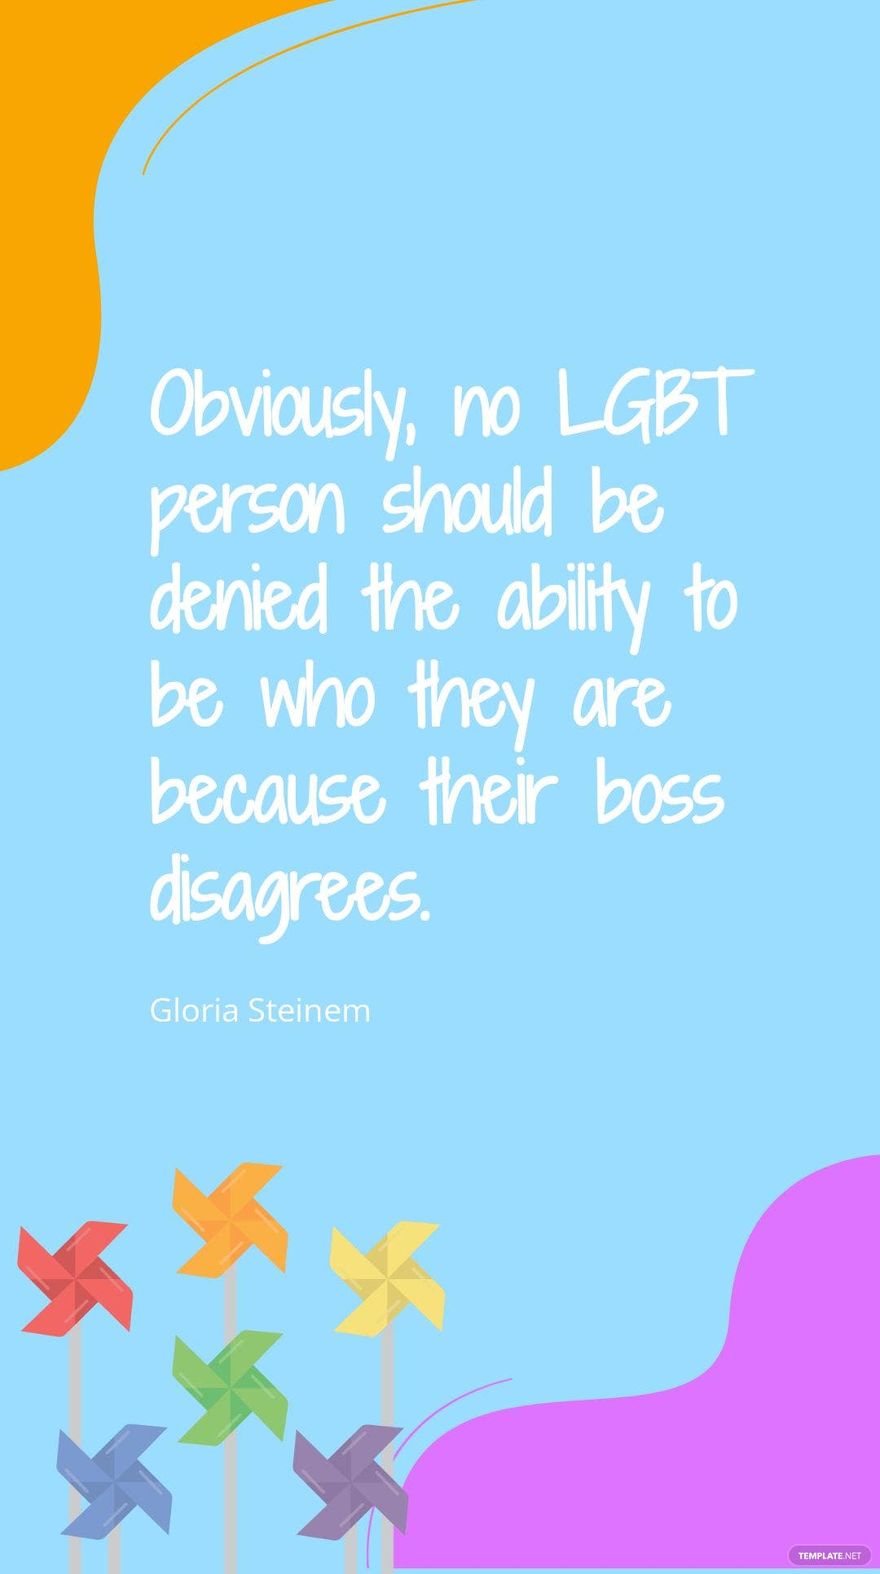 Gloria Steinem - Obviously, no LGBT person should be denied the ability to be who they are because their boss disagrees.